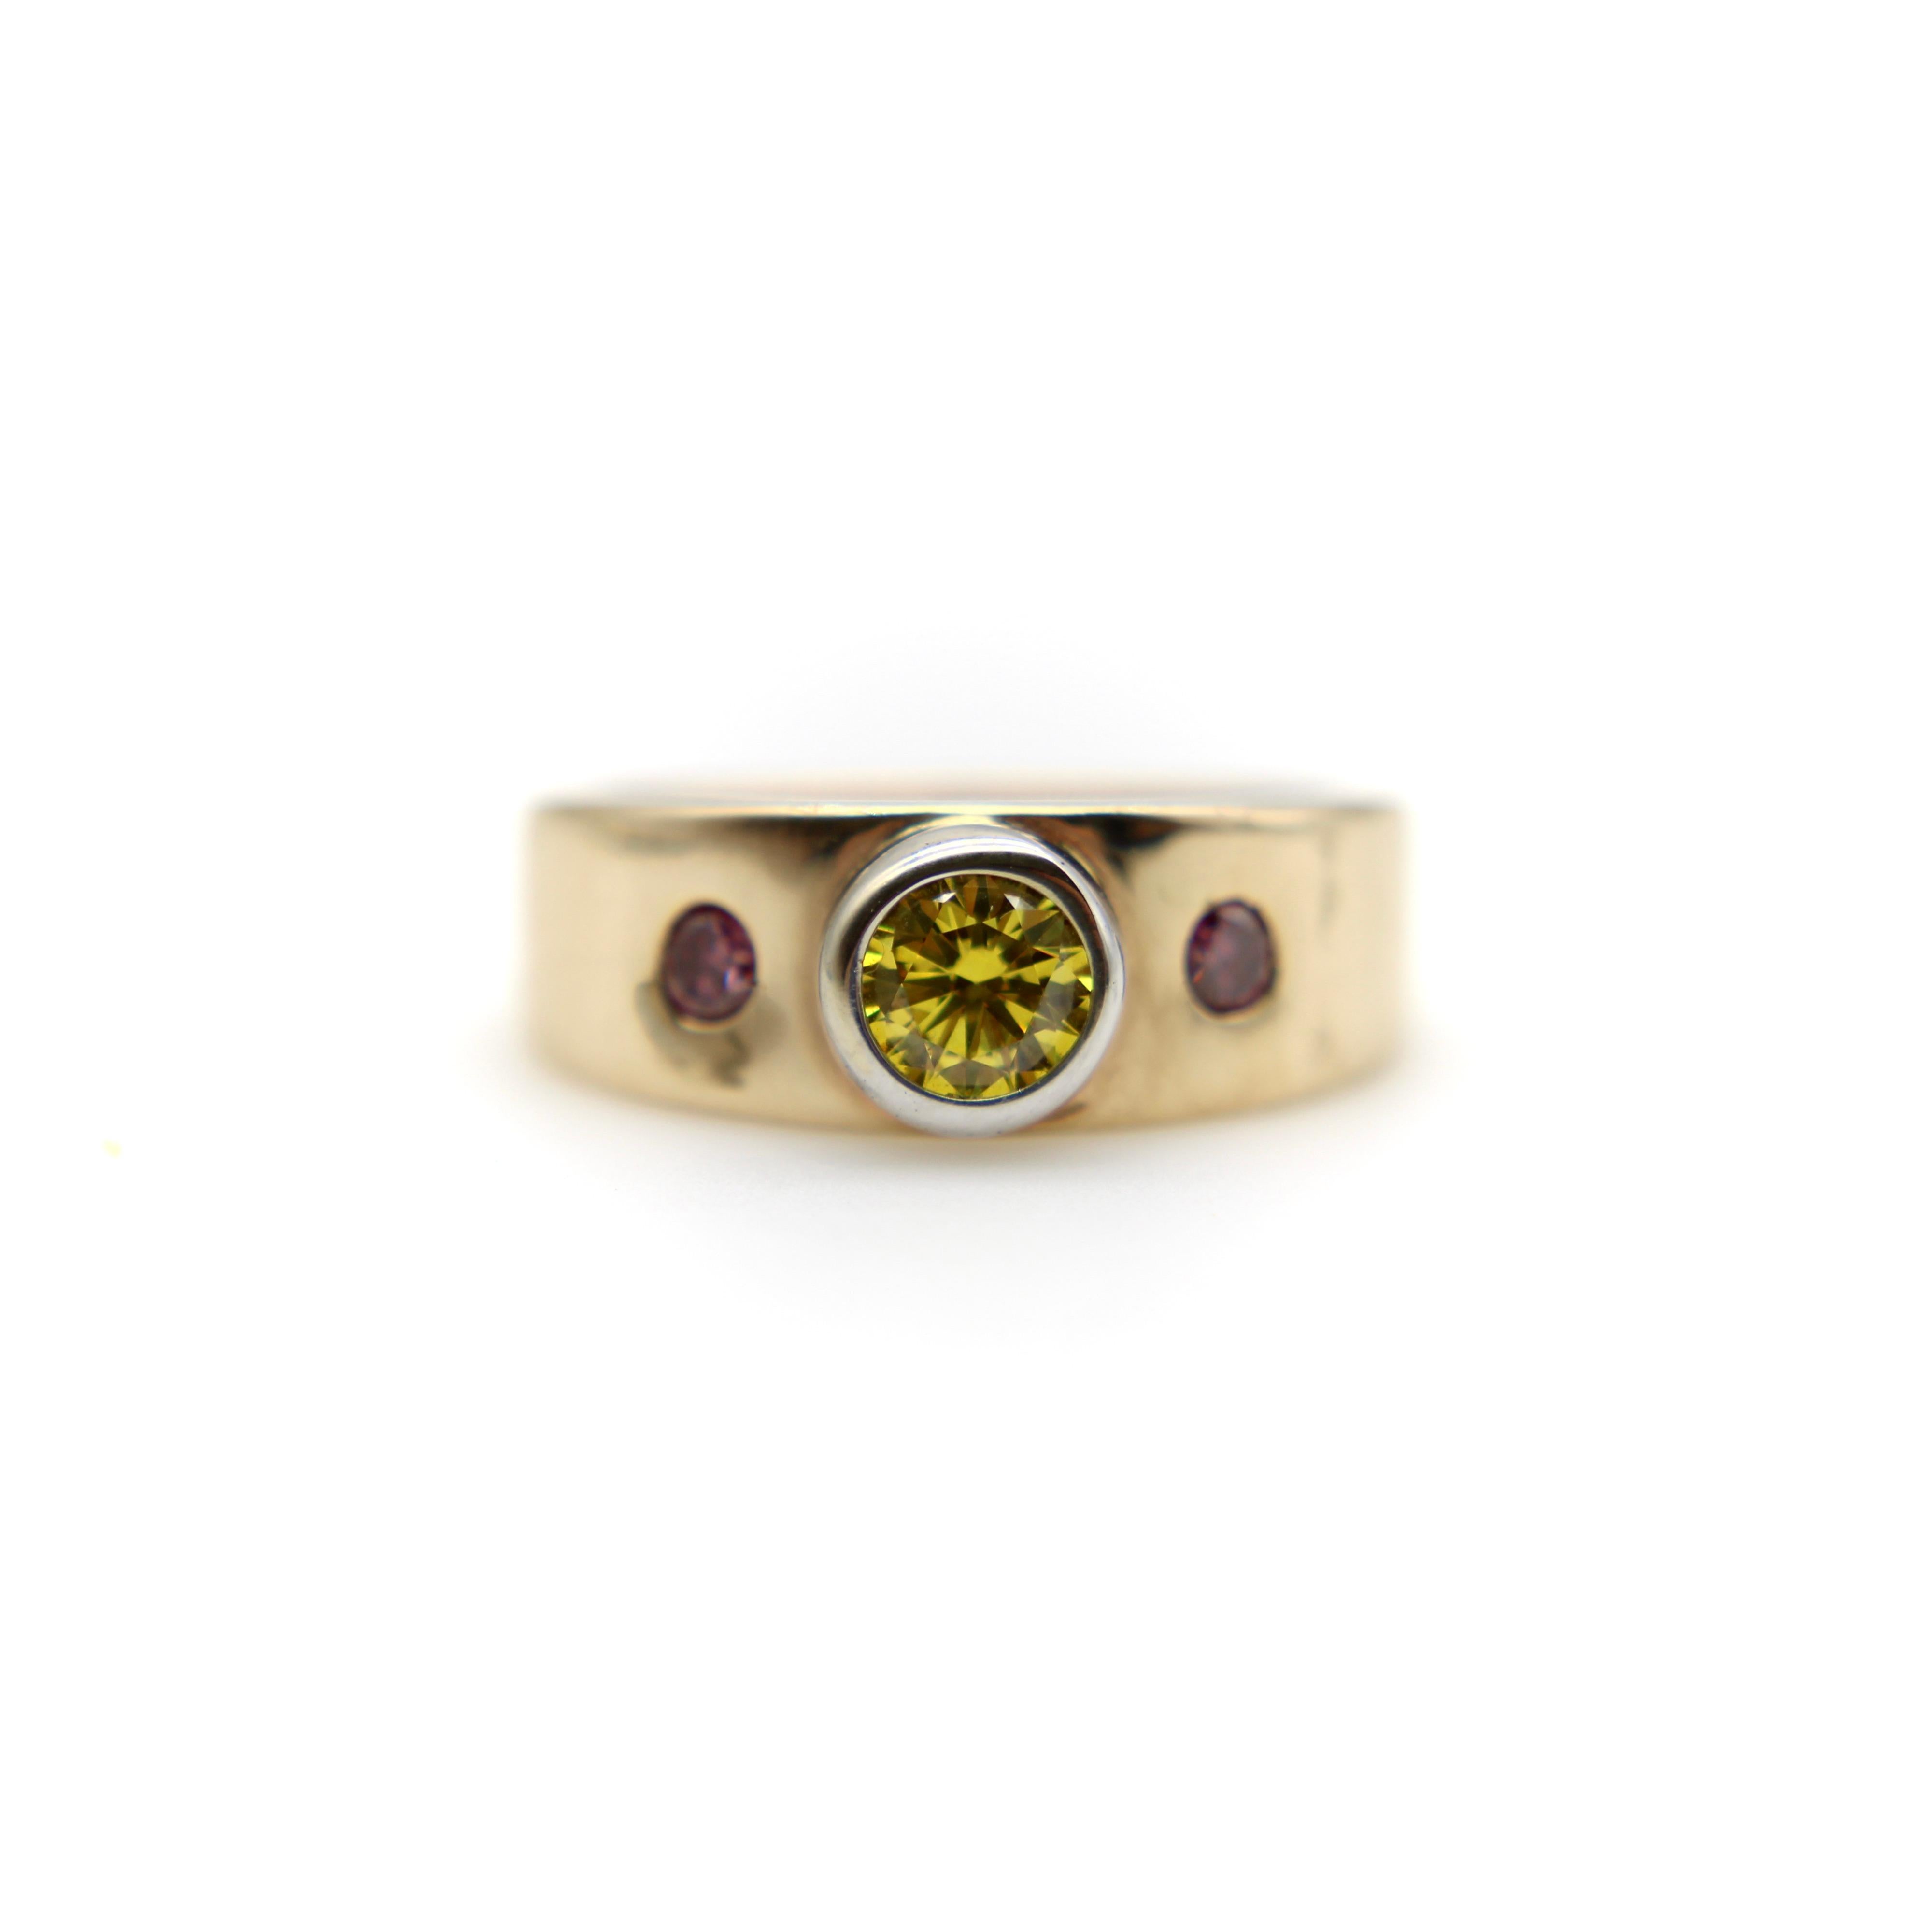 This 14k gold ring was created by MWM Goldsmithing—a Portland, Oregon jeweler known for intricate designs and one-of-a-kind custom pieces. The ring features three natural diamonds, irradiated to achieve stunning pink and yellow hues. The central